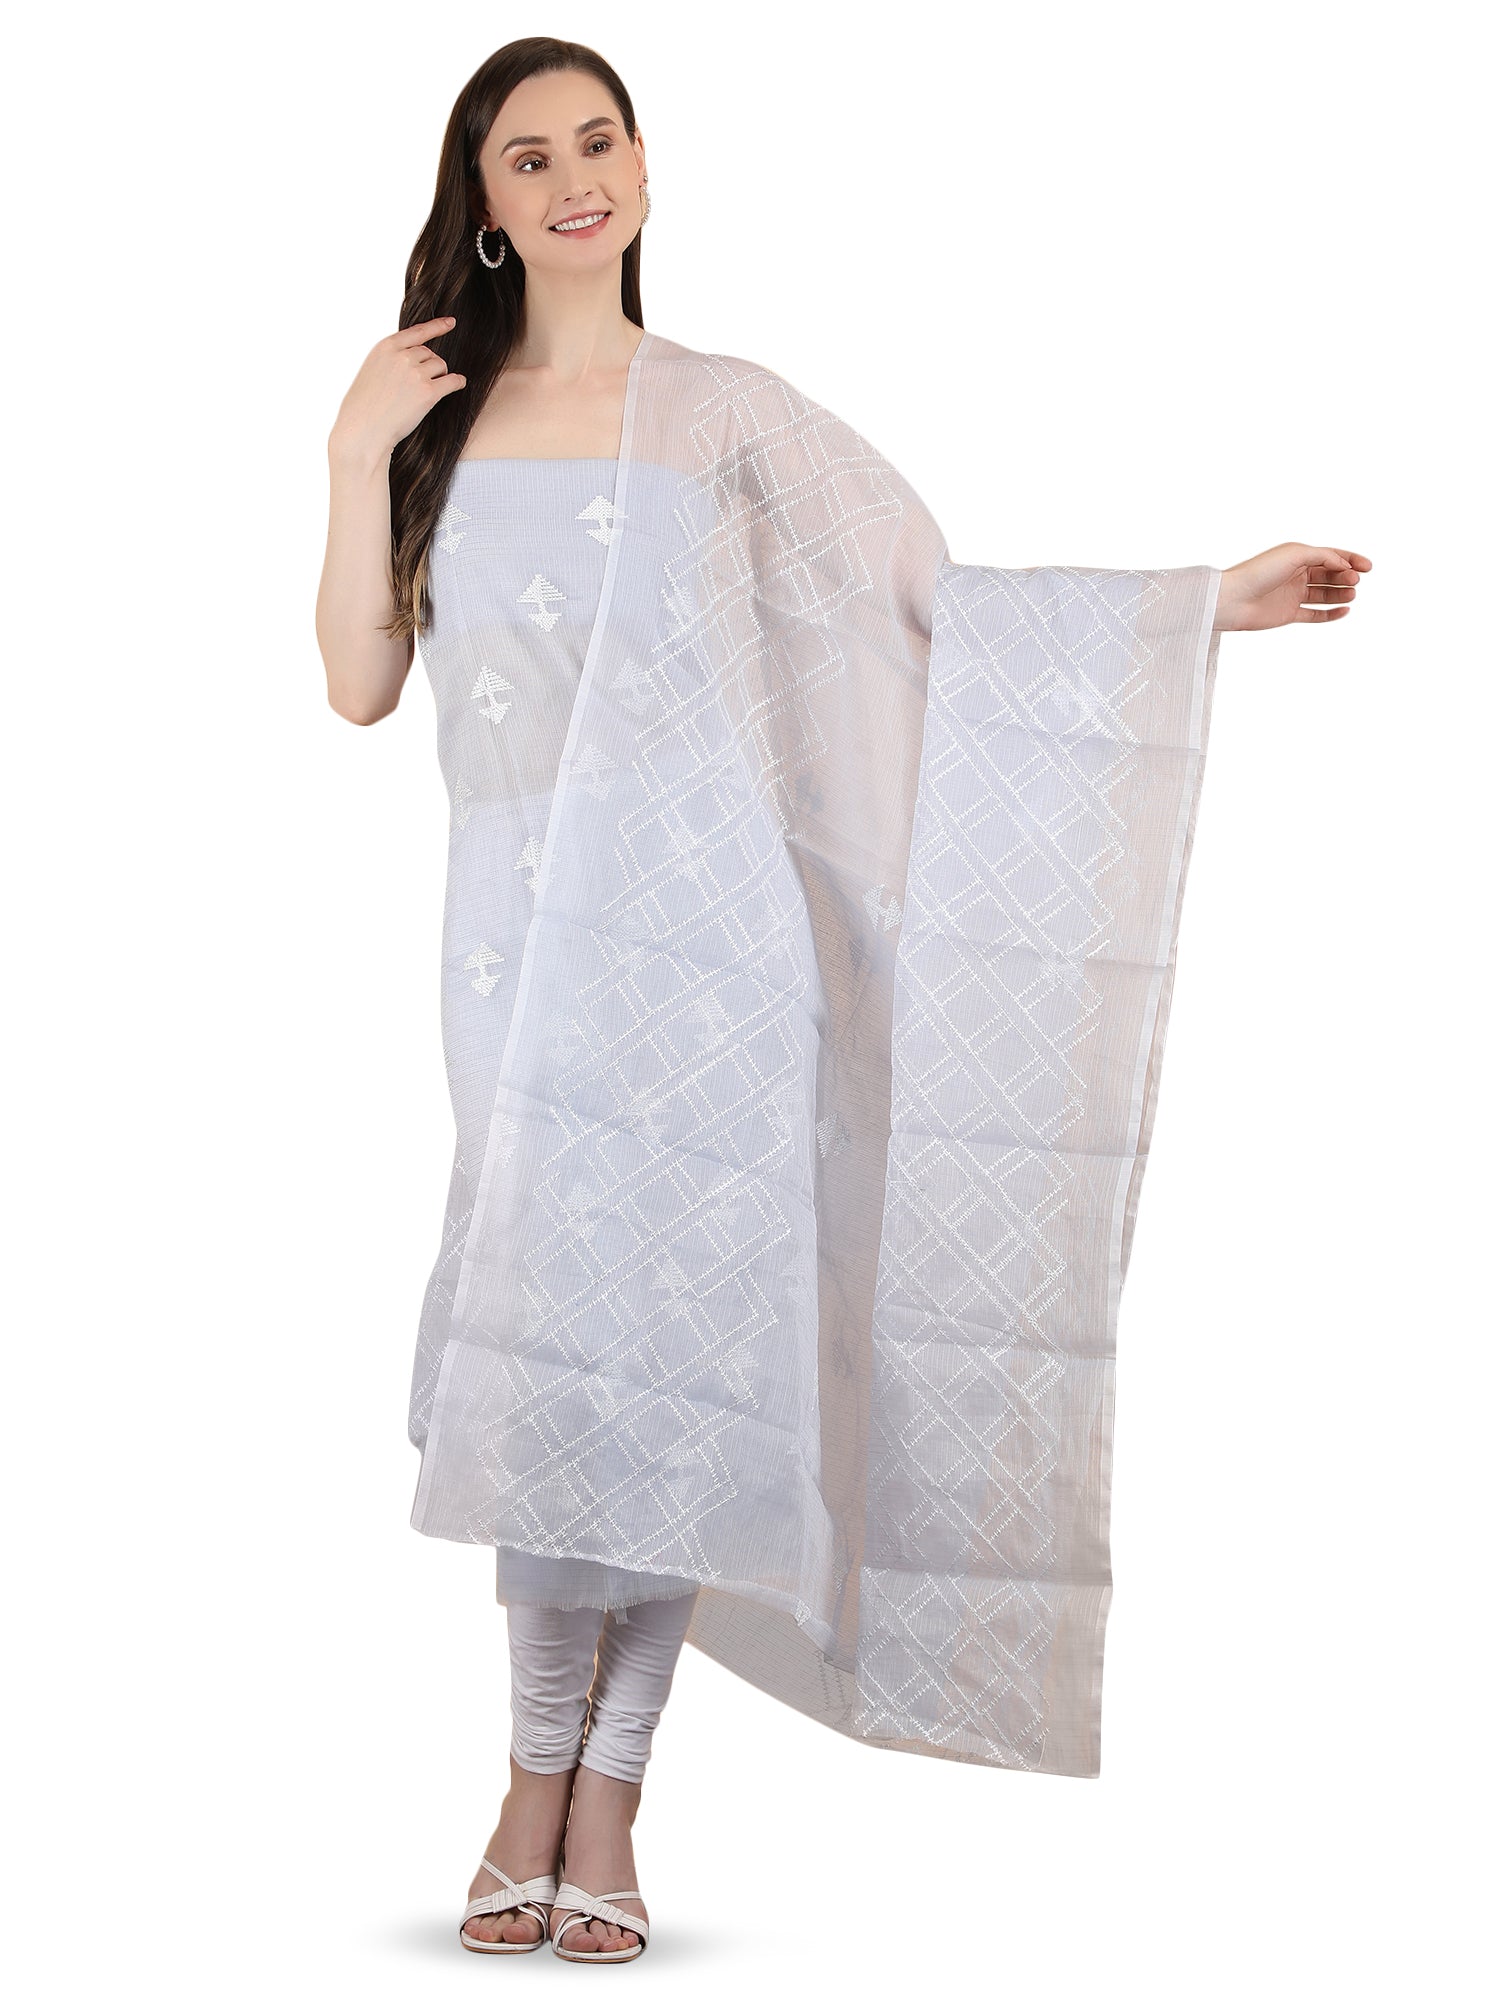 Women's Grey Color and White Embroidery Unstitched Suit and Matching Dupatta set - Kora Doria Cotton, ideal for Summers